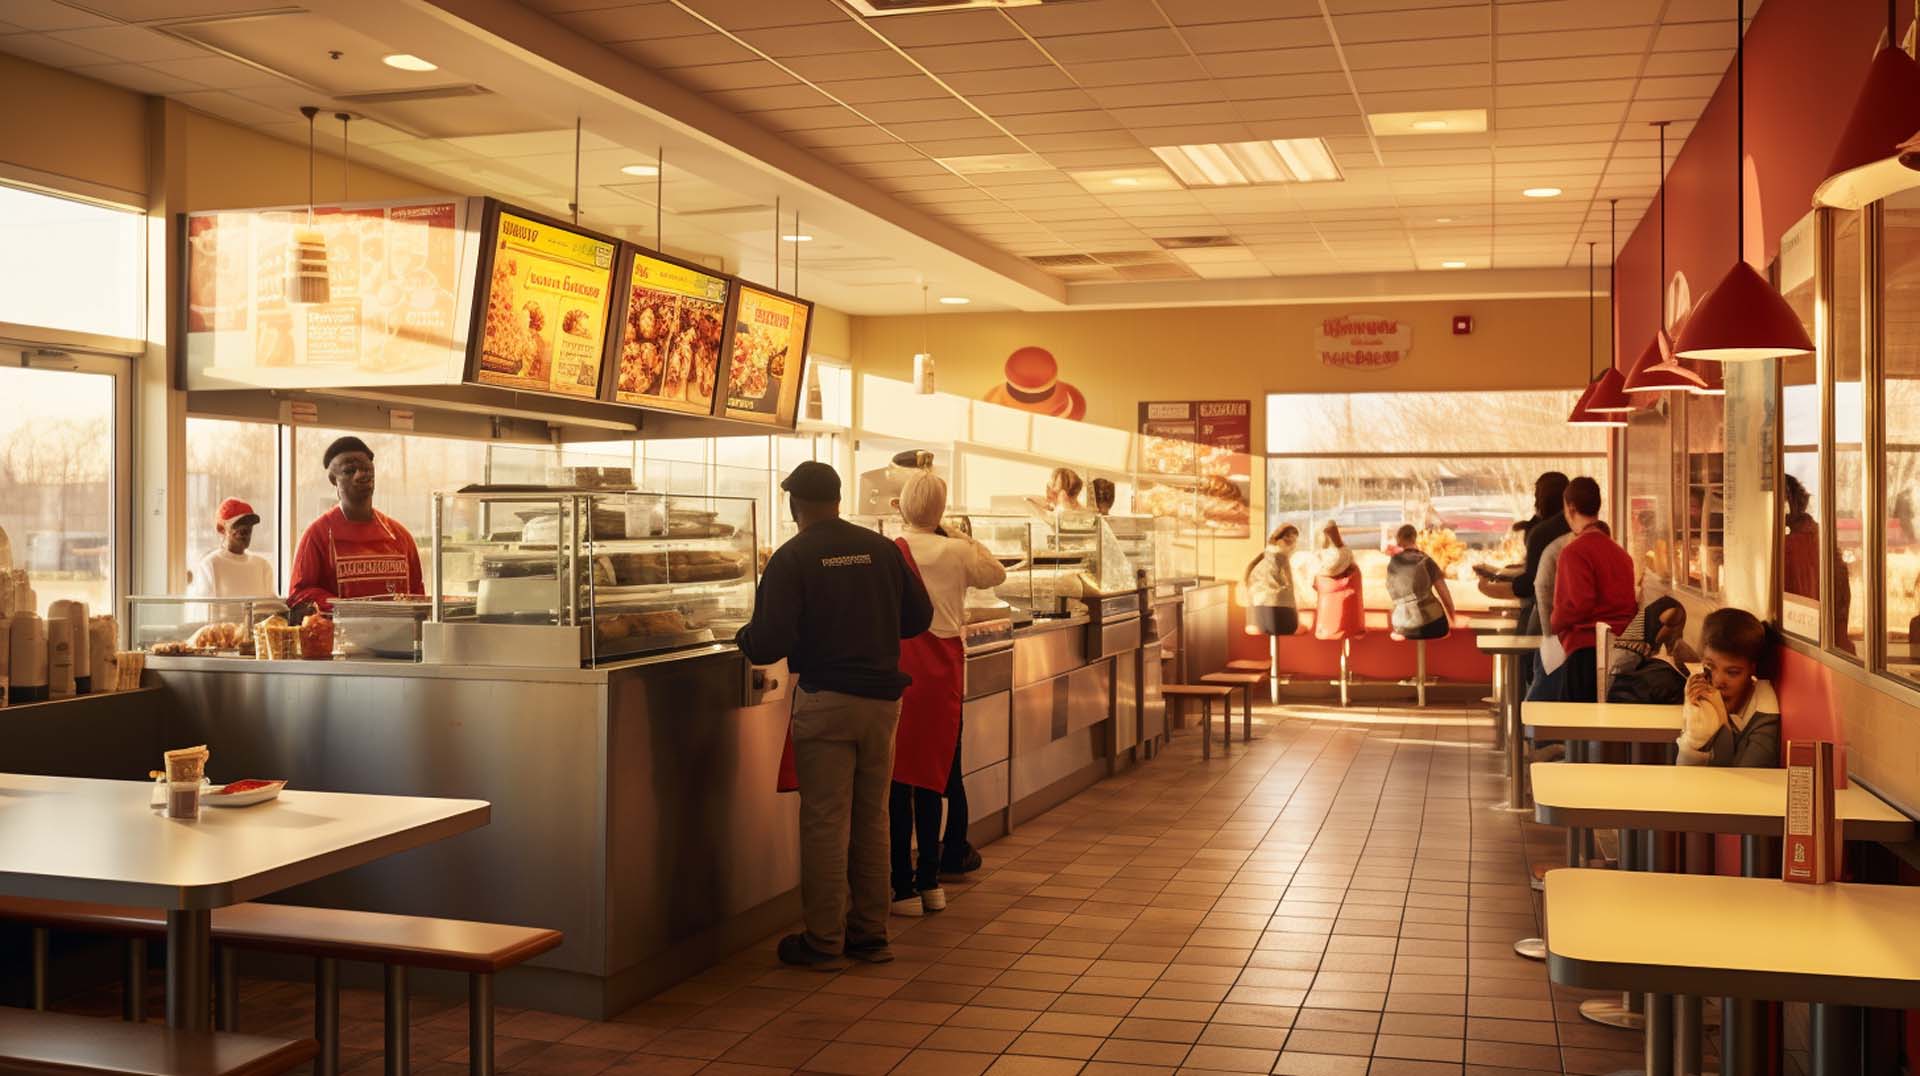 Toledo has a wide variety of delicious fast food options to choose from.